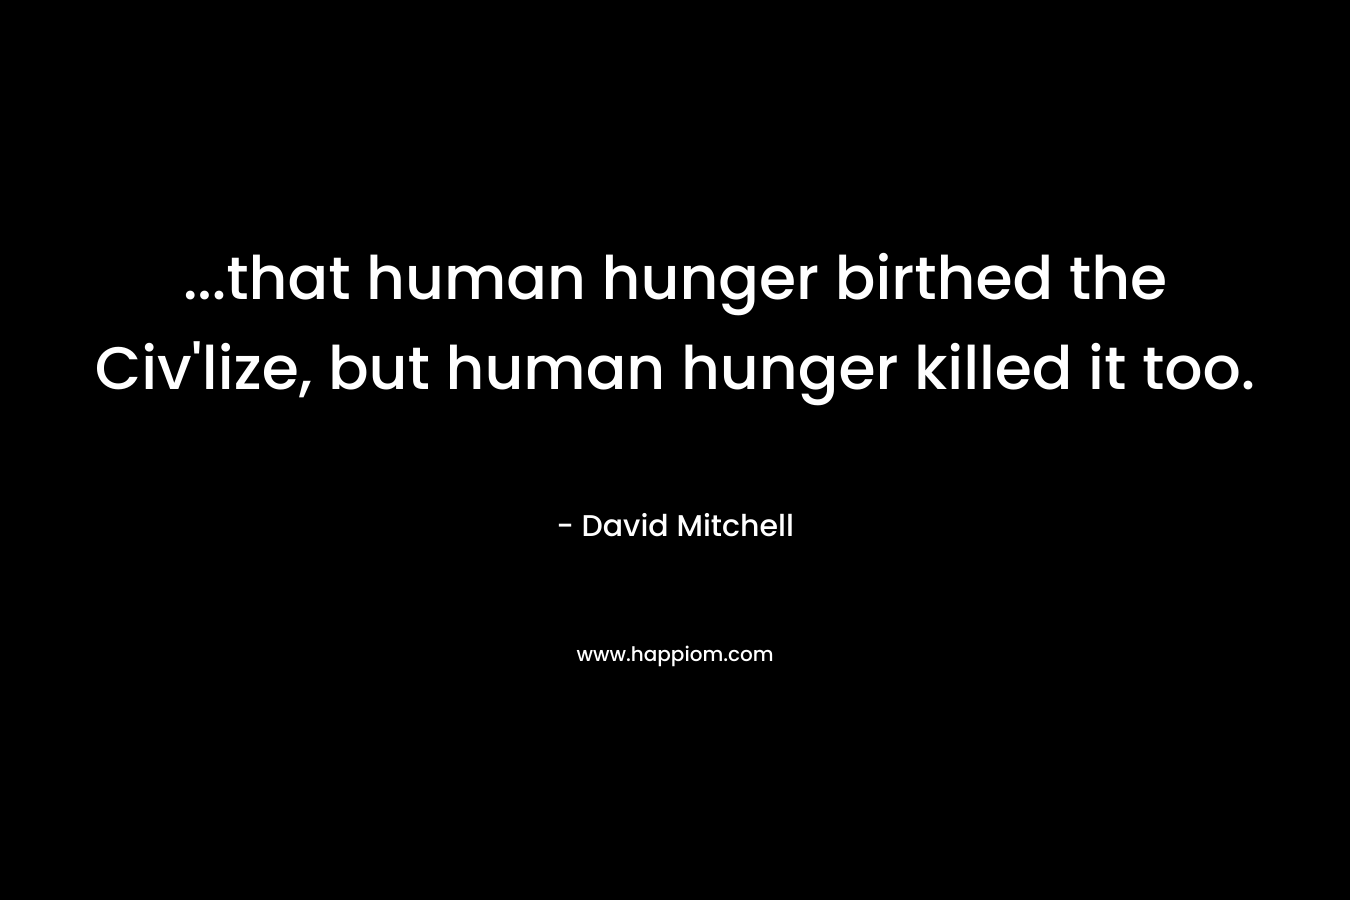 …that human hunger birthed the Civ’lize, but human hunger killed it too. – David Mitchell